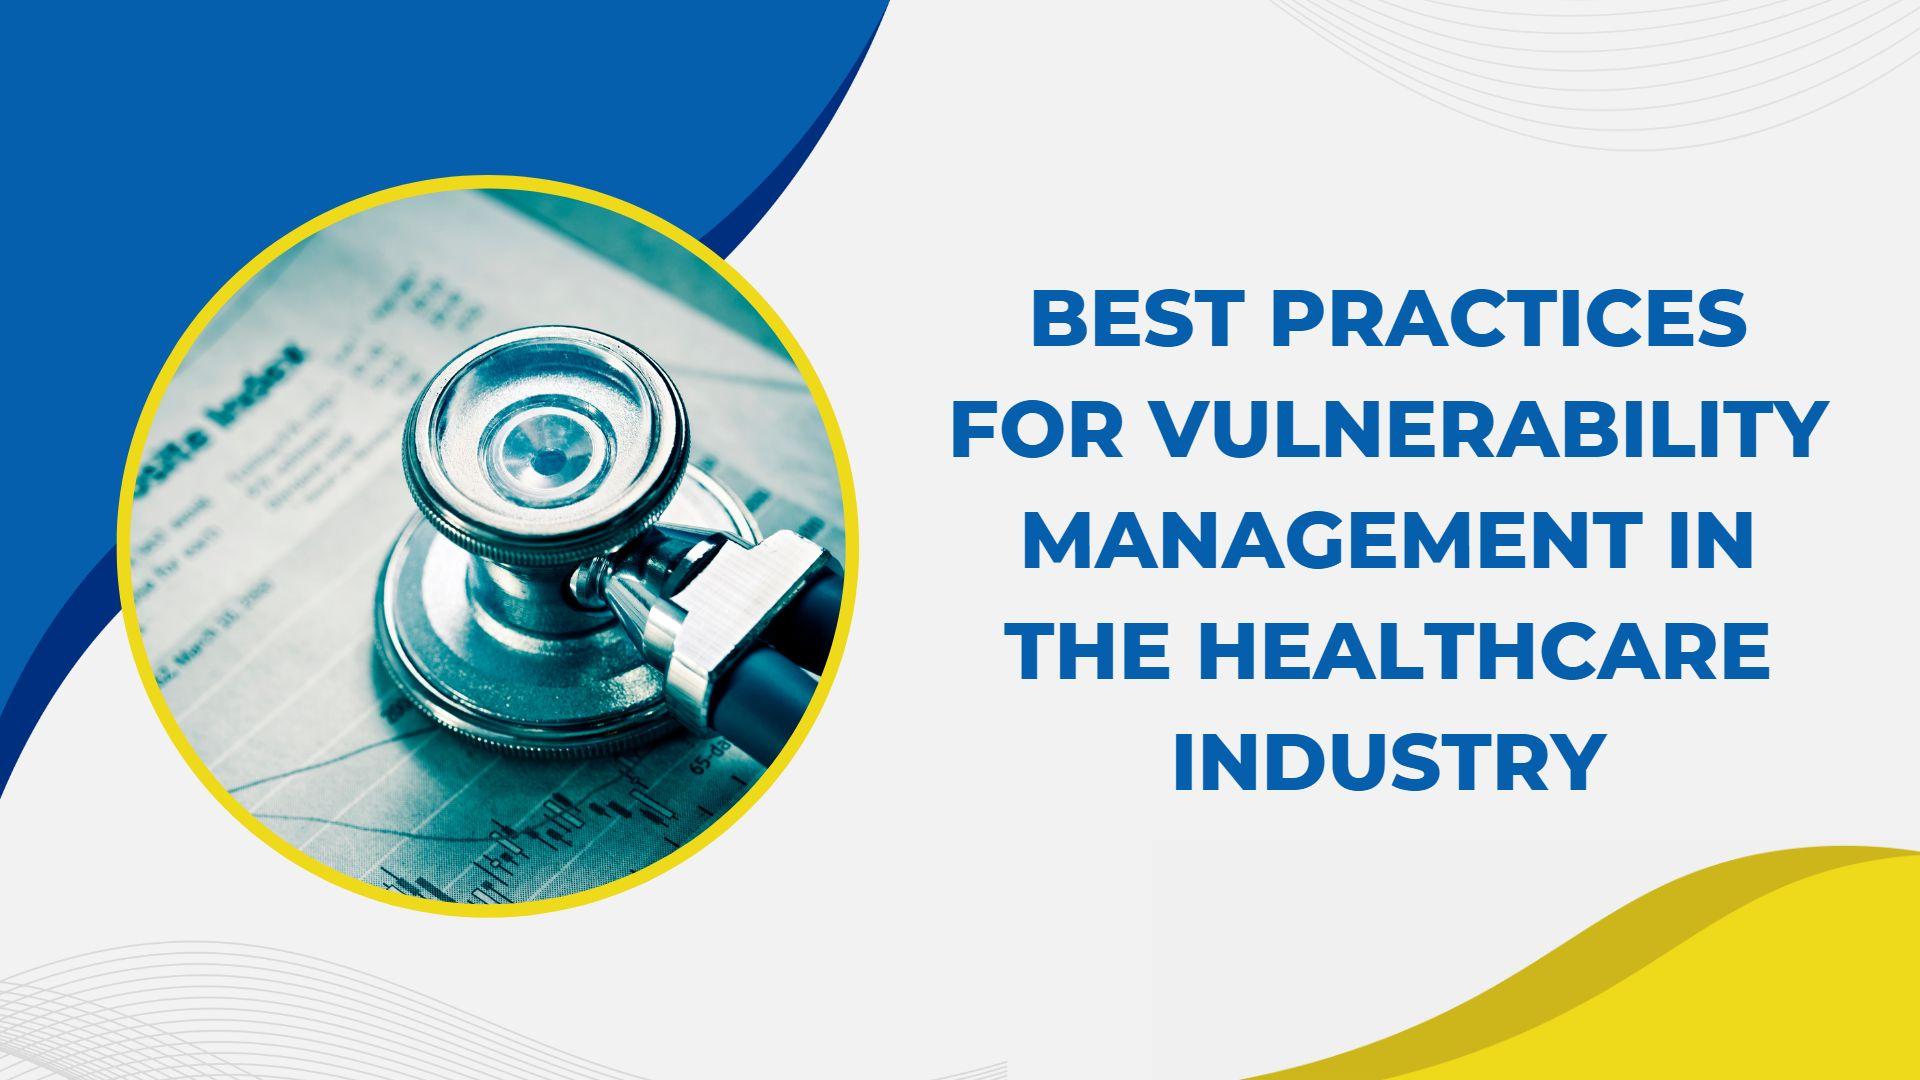 Best Practices for Vulnerability Management in the Healthcare Industry